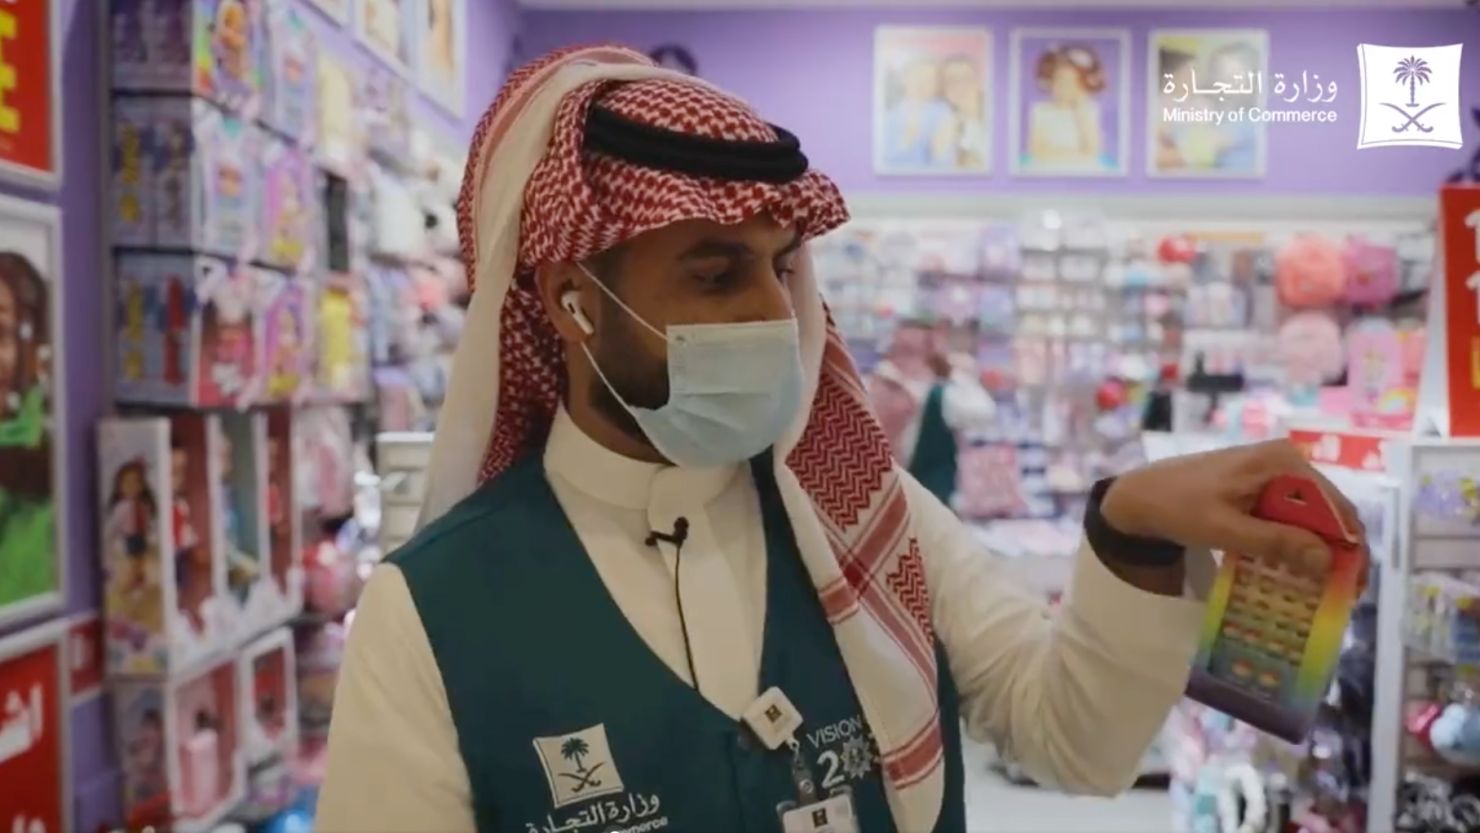 Saudi officials say they are seizing rainbow colored items because they "promote homosexuality."  